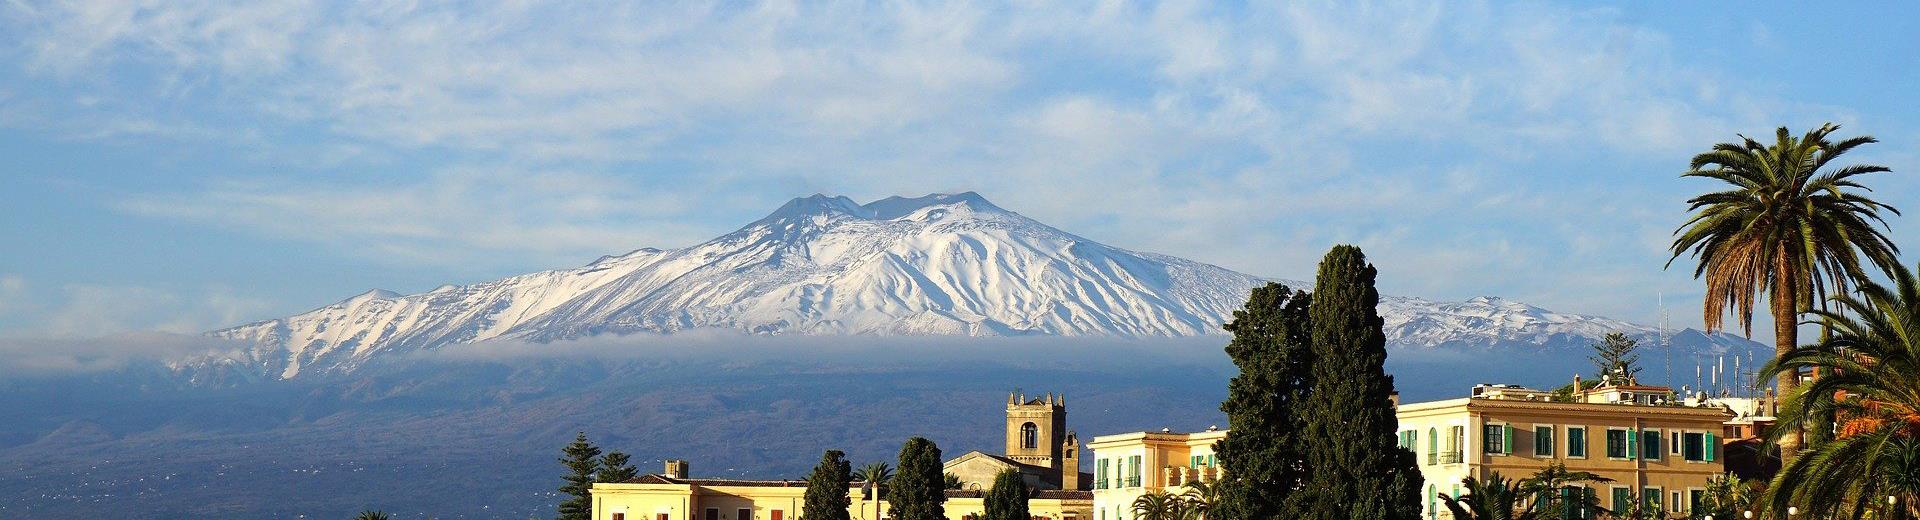 Hotel Santa Caterina is just minutes away from Mount Etna